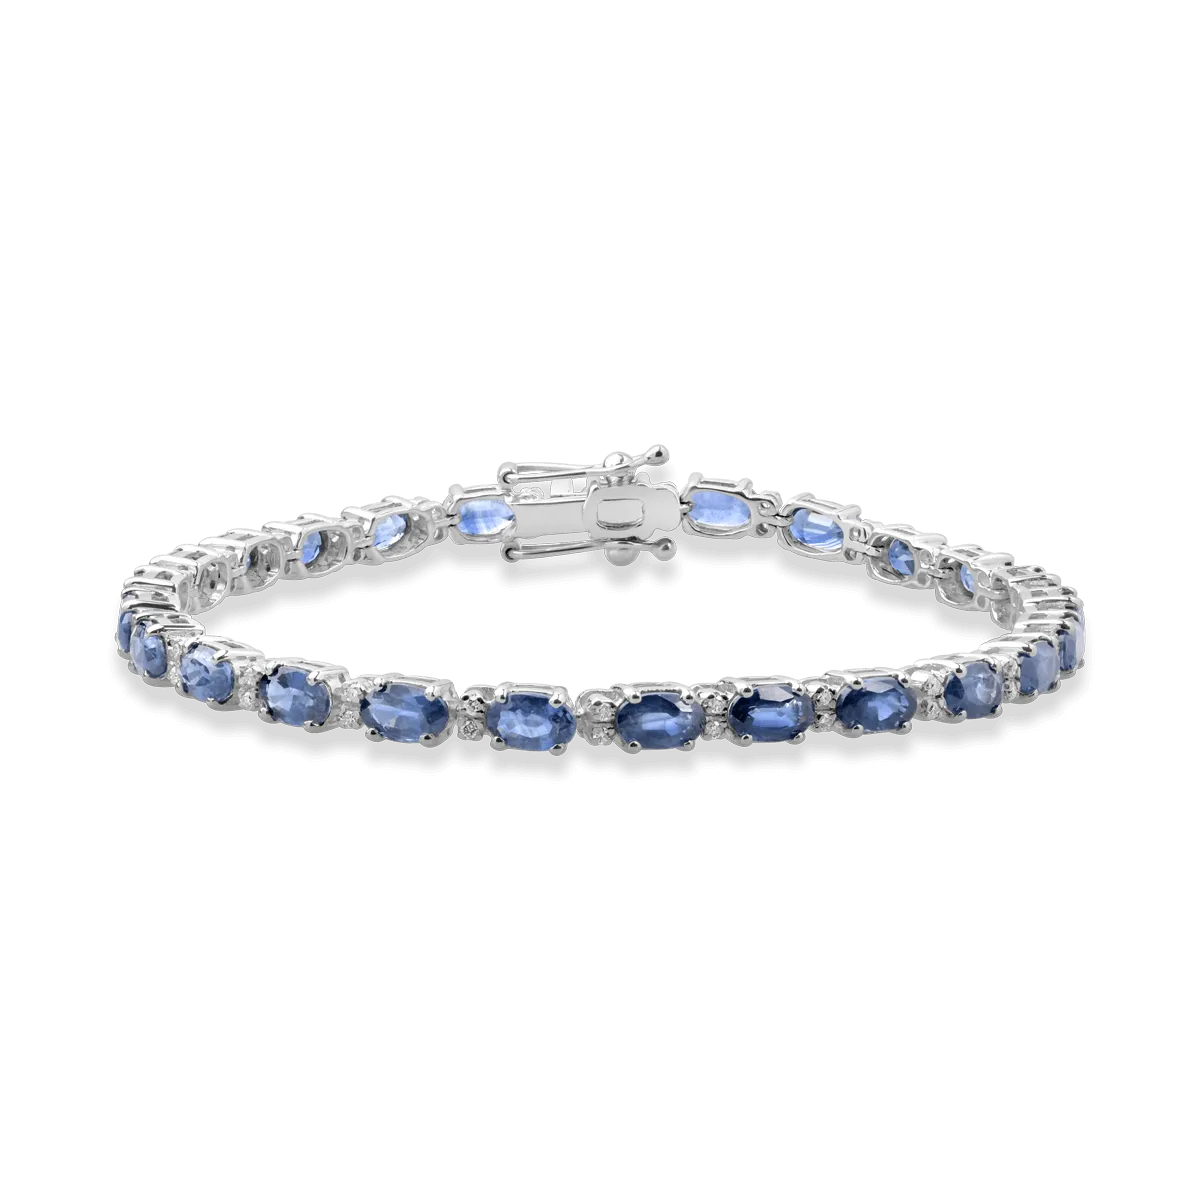 18K white gold bracelet with 8.1ct sapphires and 0.23ct diamonds